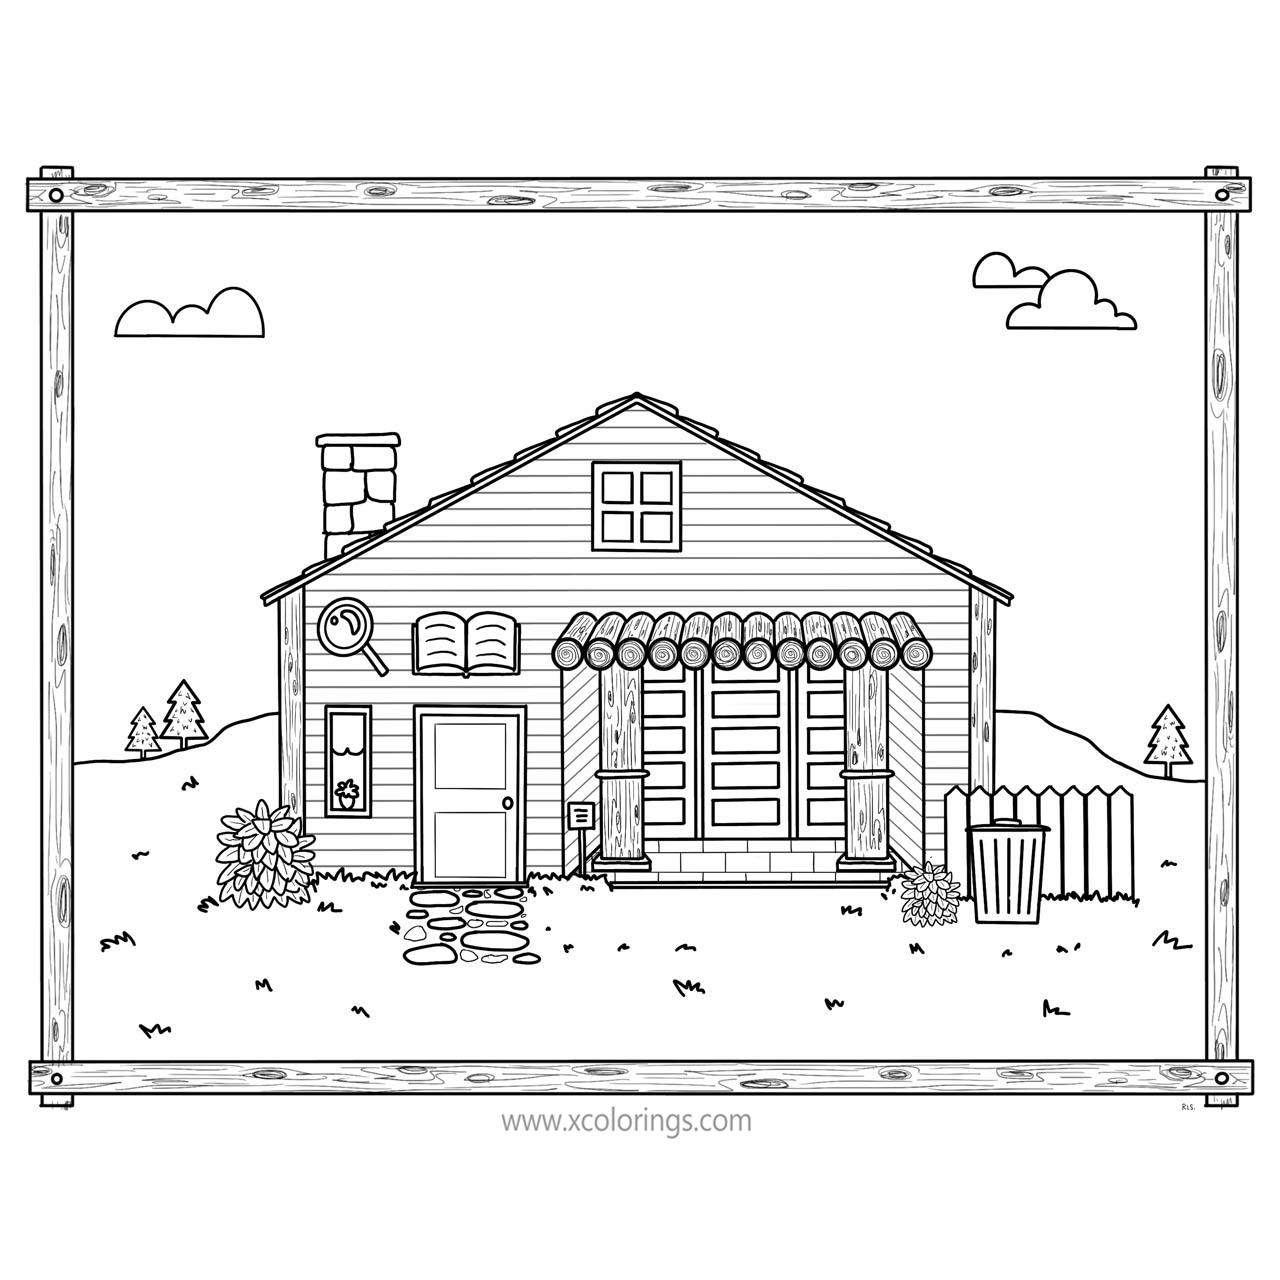 Free Stardew Valley House Coloring Pages by RobynSmith printable